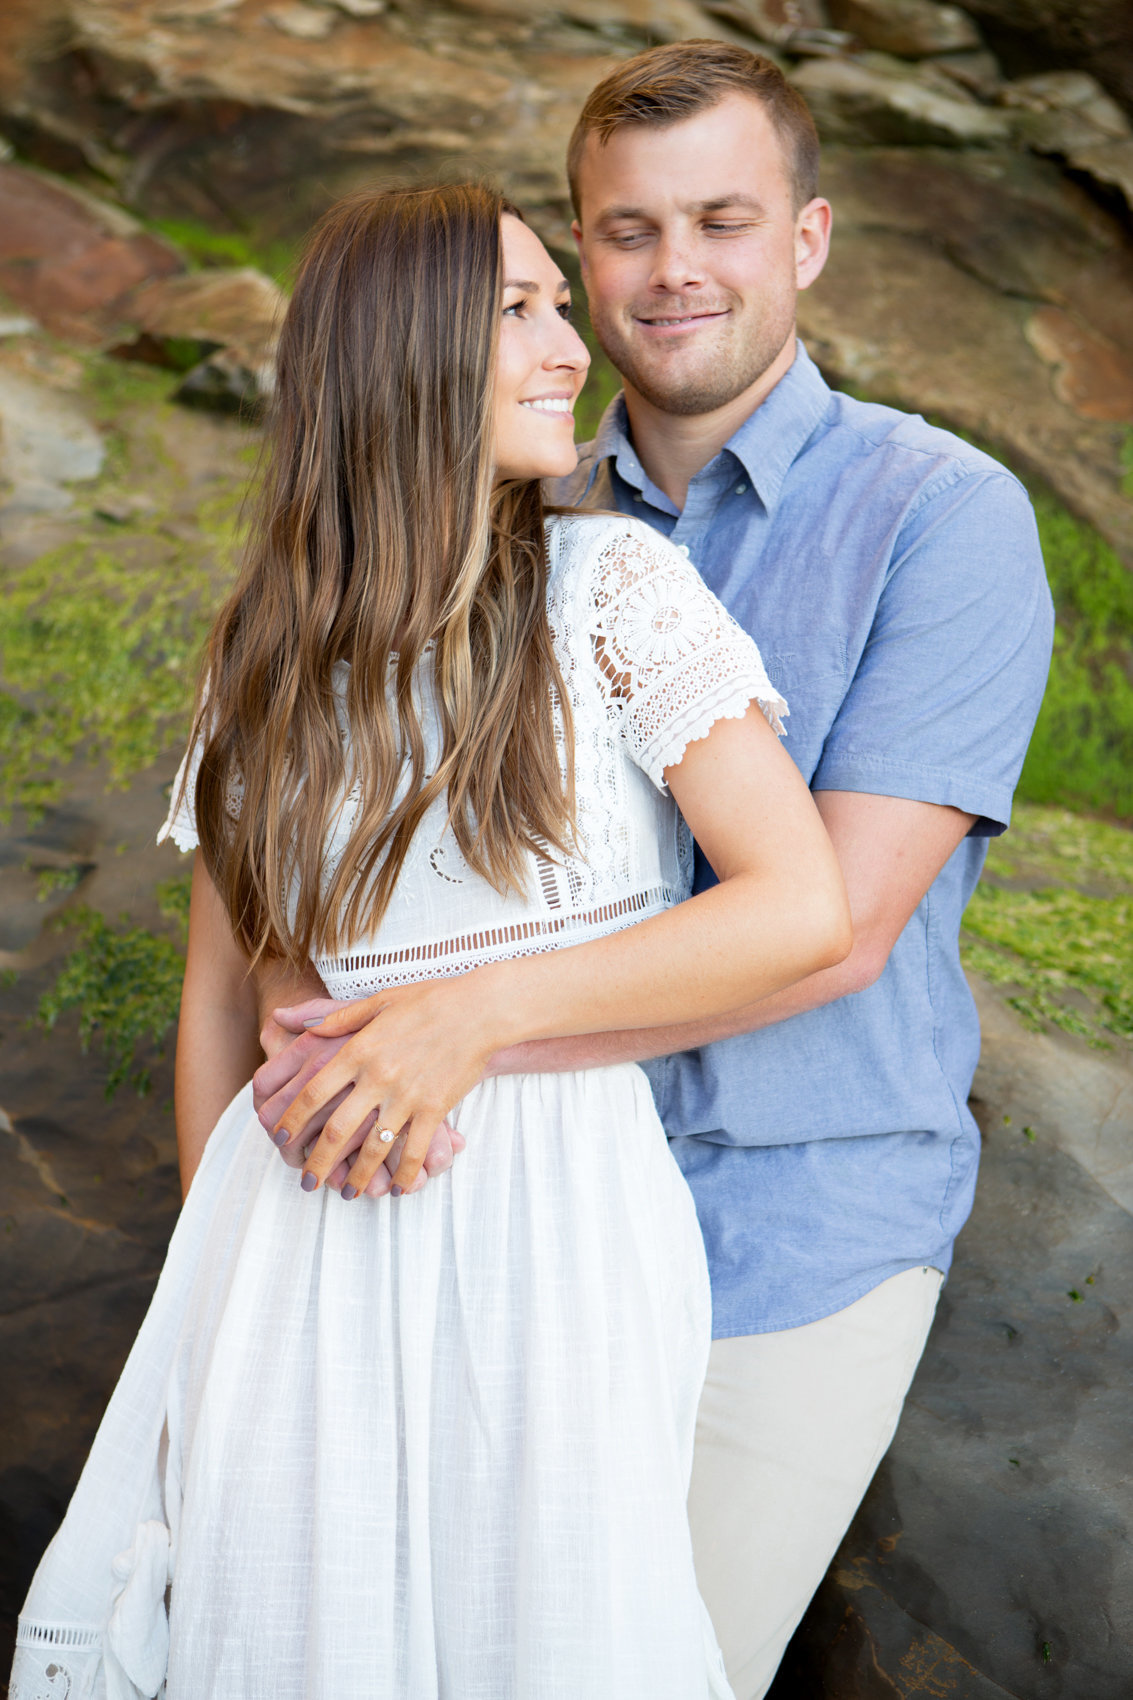 Engagement session beach, portrait of young couple on rocks, outdoor photo session northern california